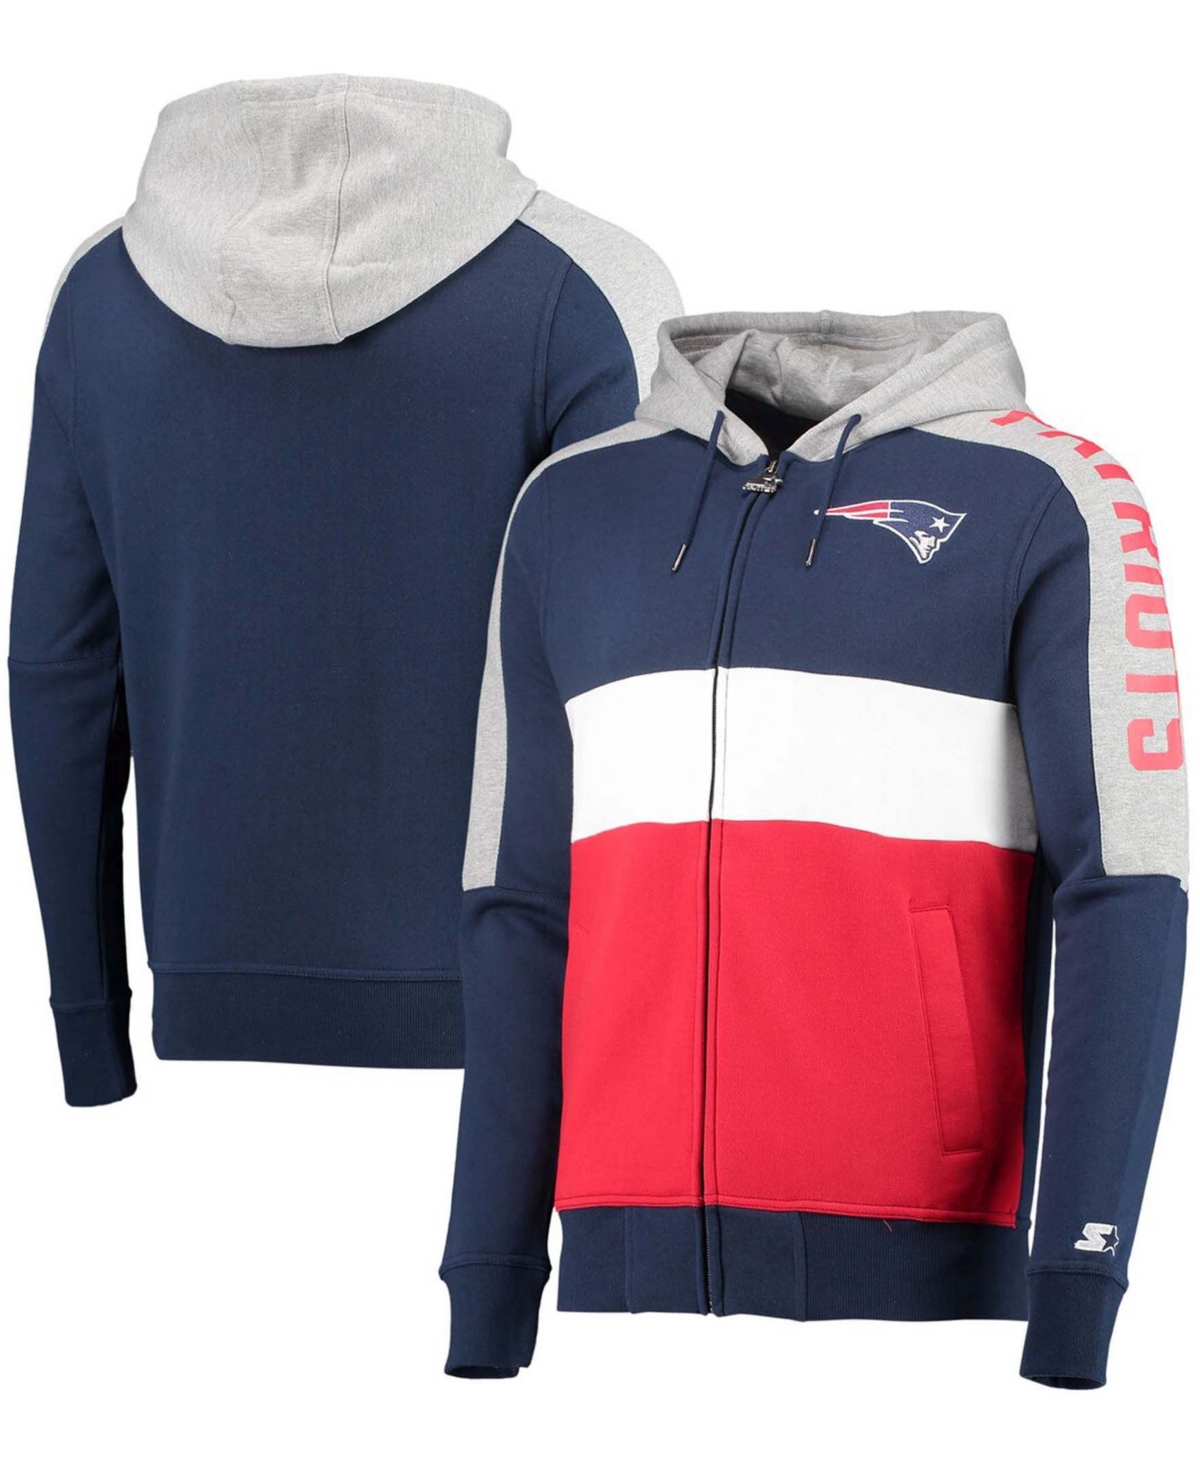 Men's Navy, Red New England Patriots Playoffs Color Block Full-Zip Hoodie - Navy, Red